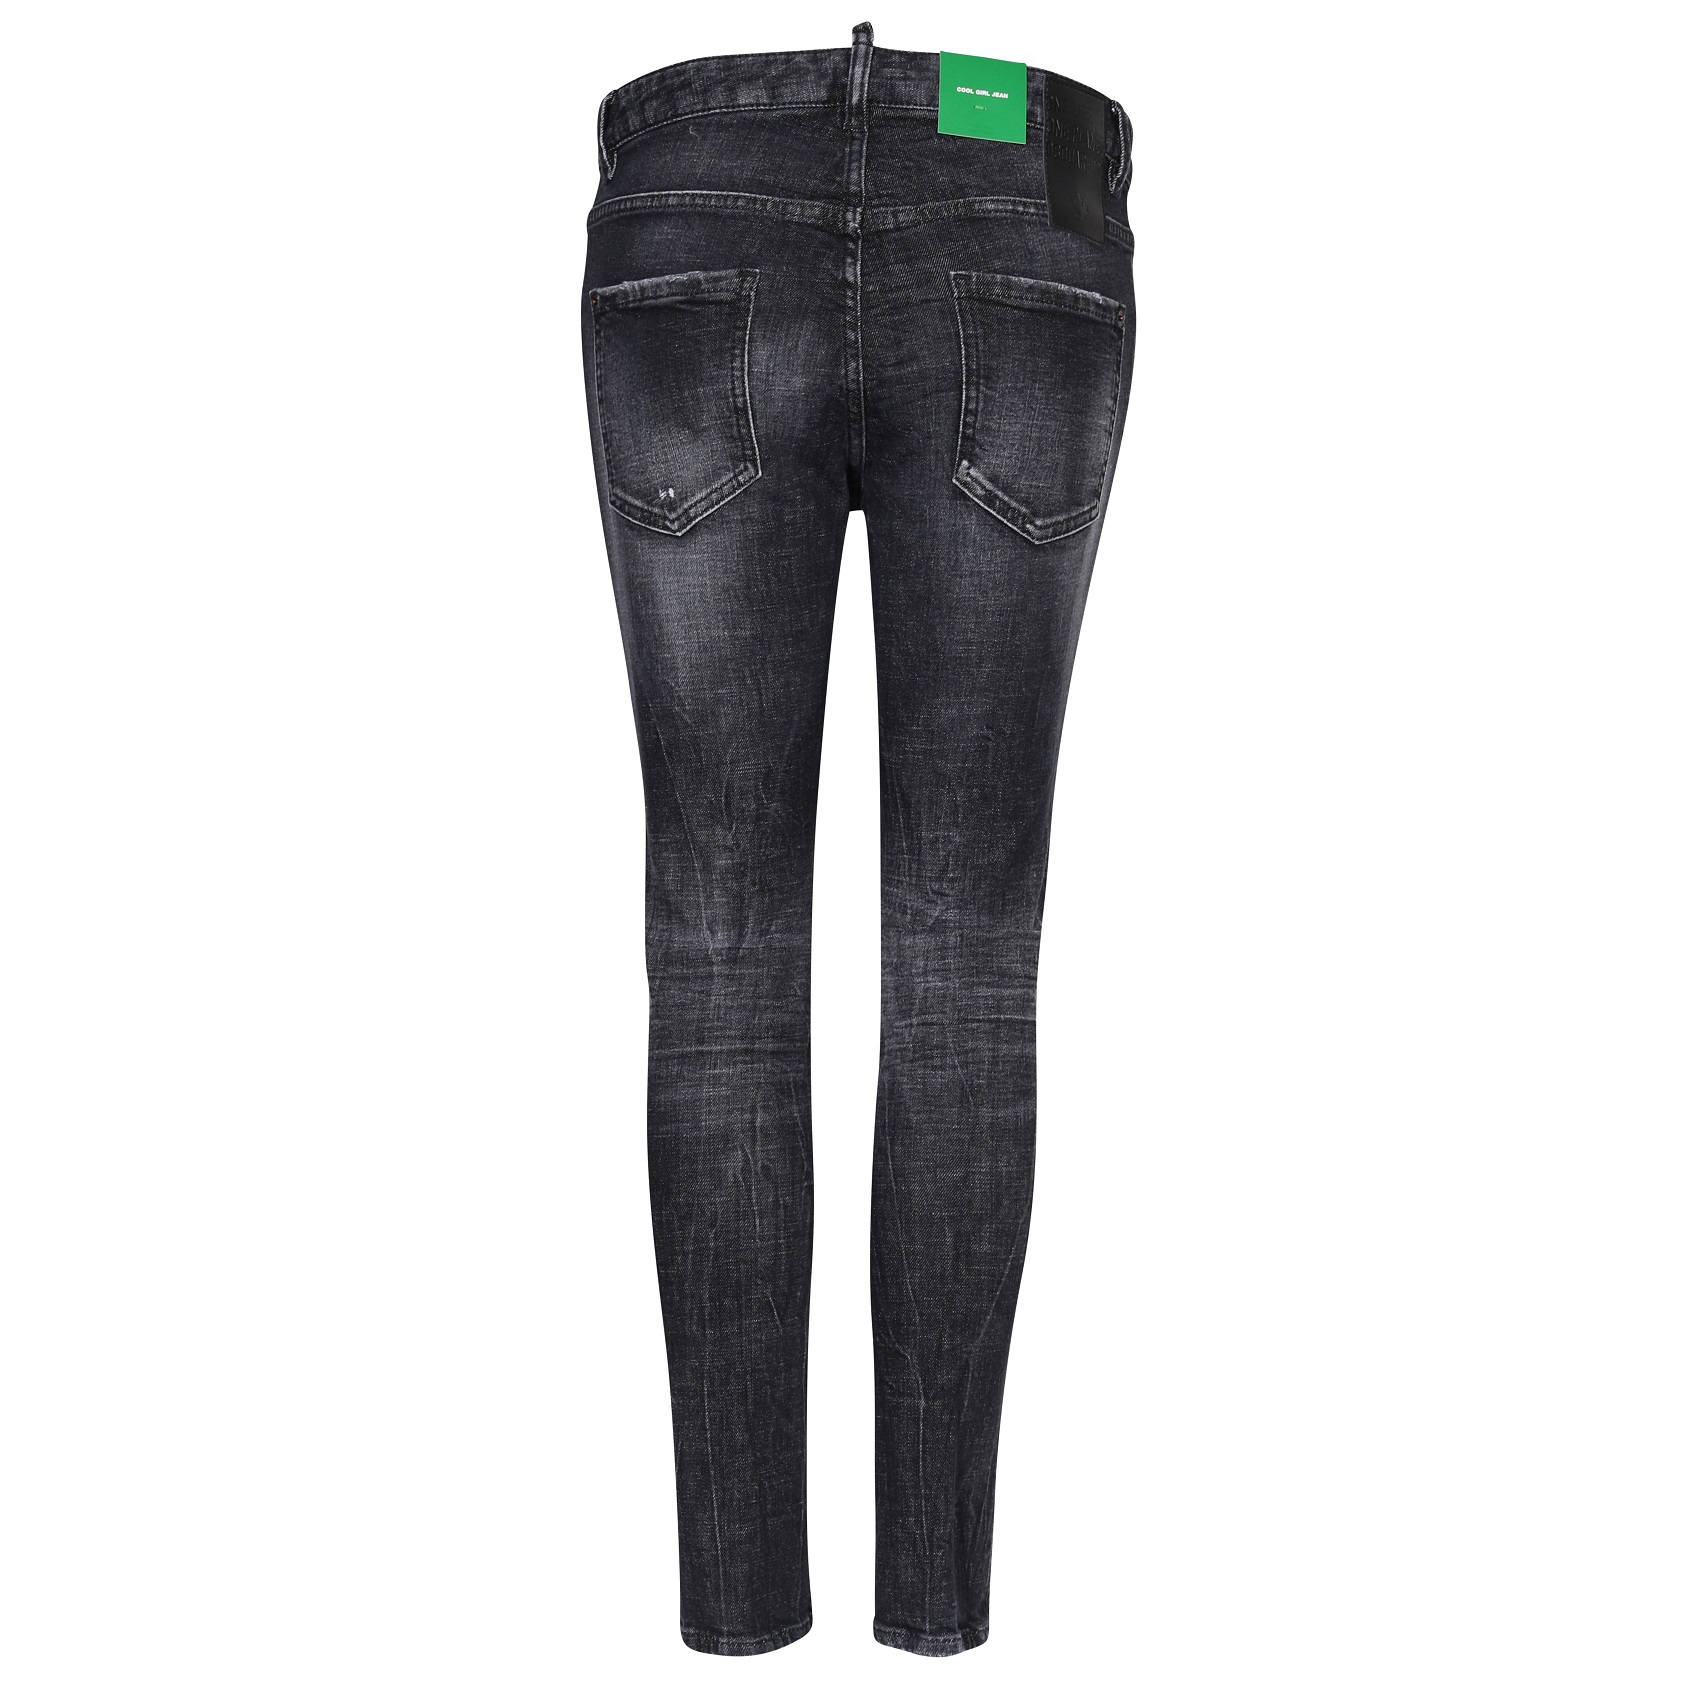 DSQUARED2 Jeans Cool Girl Green Label in Washed Black 38